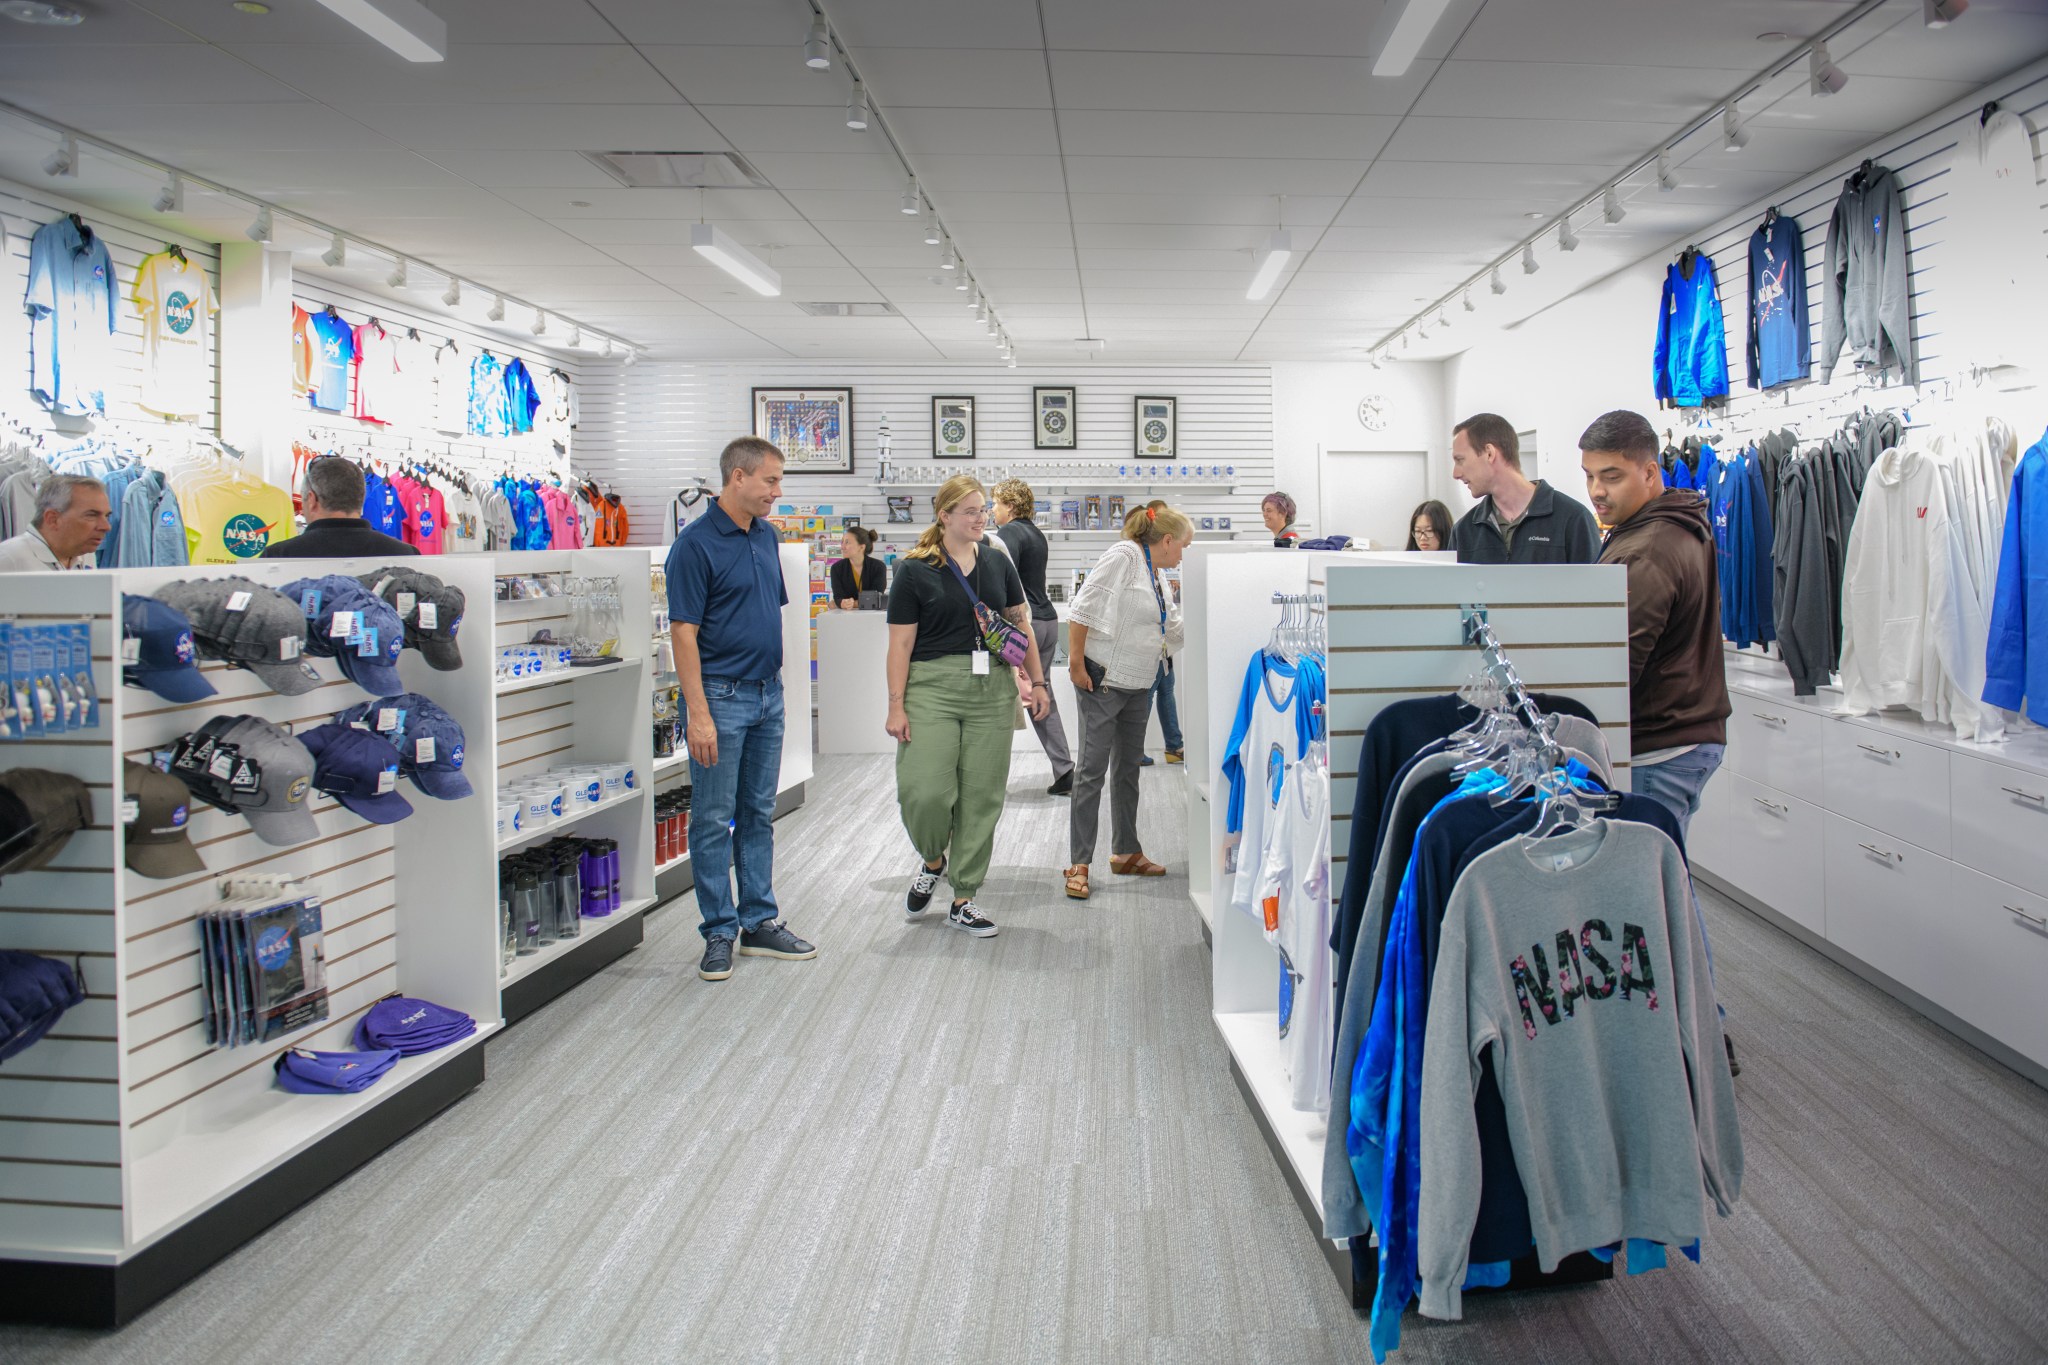 Shoppers browse in a store filled with NASA merchandise.